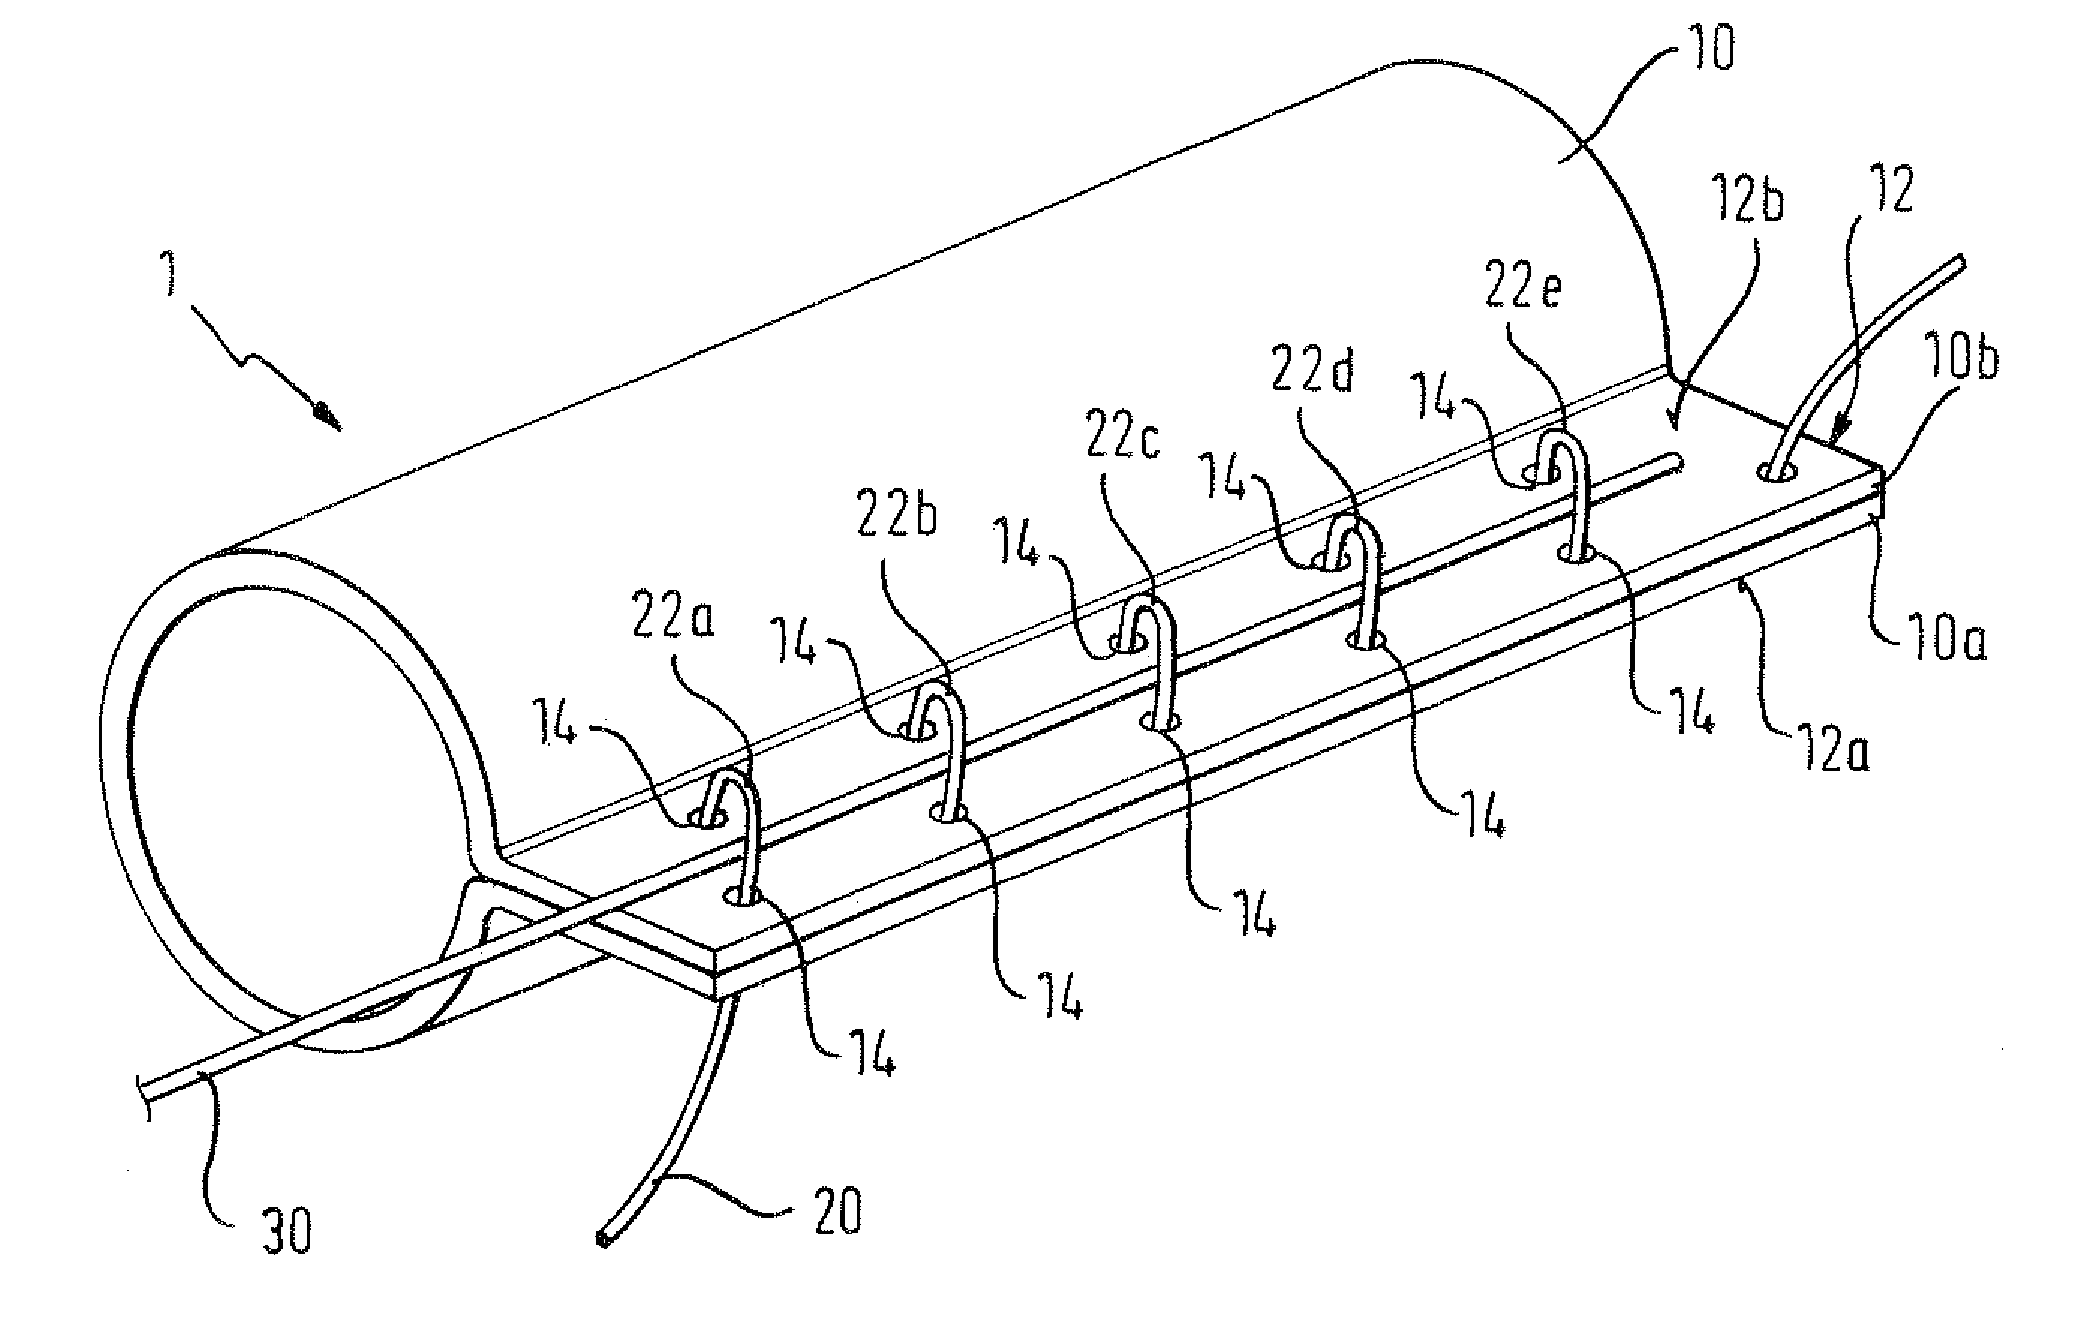 Catheter sheath for implant delivery